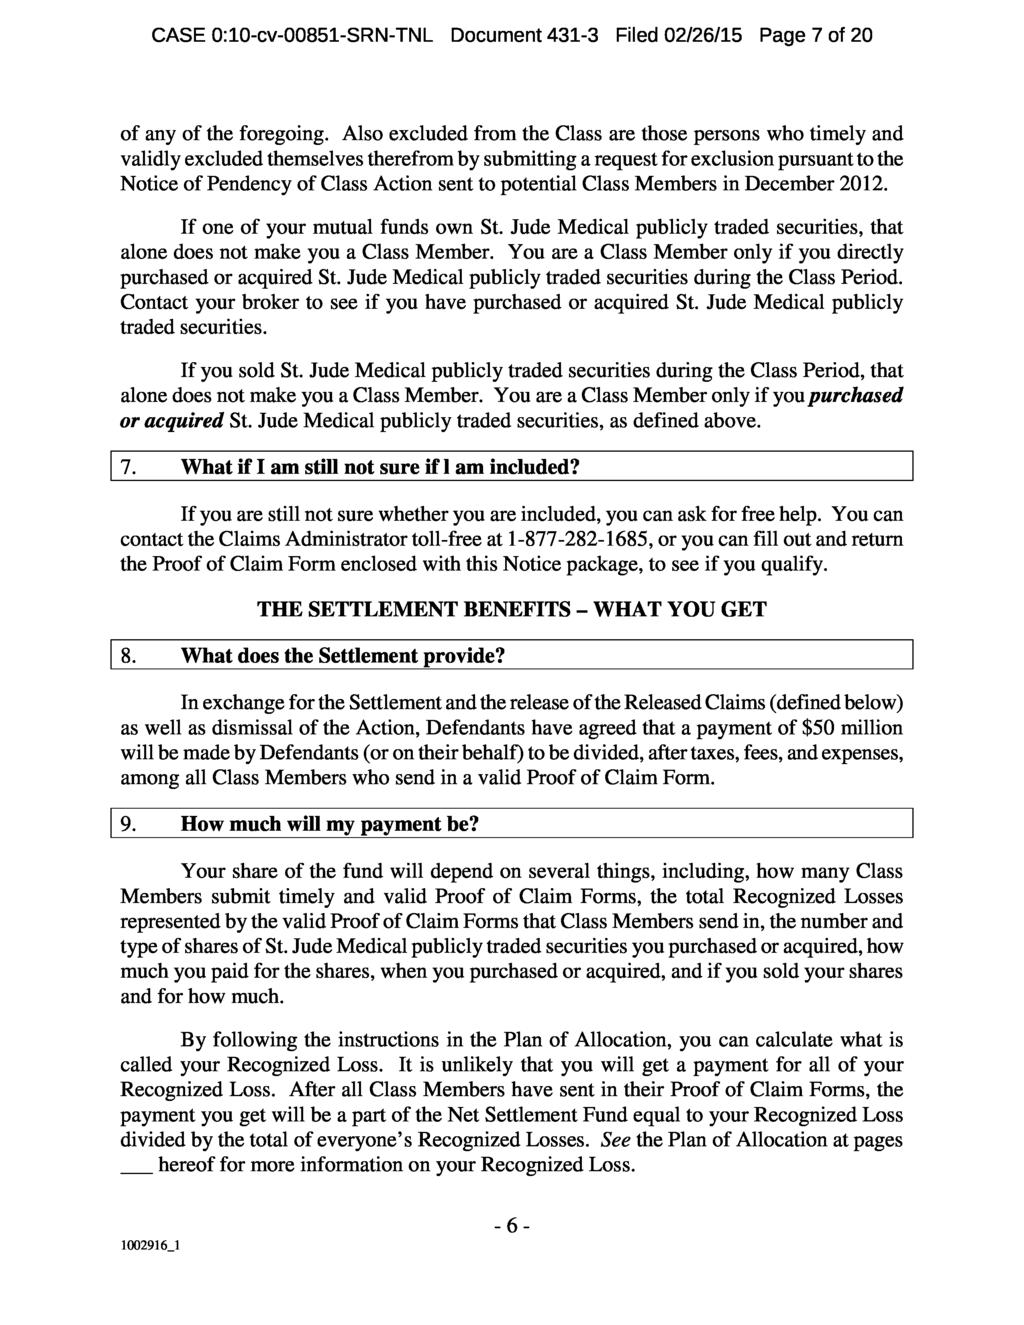 CASE 0:10-cv-00851-SRN-TNL Document 431-3 Filed 02/26/15 Page 7 of 20 of any of the foregoing.